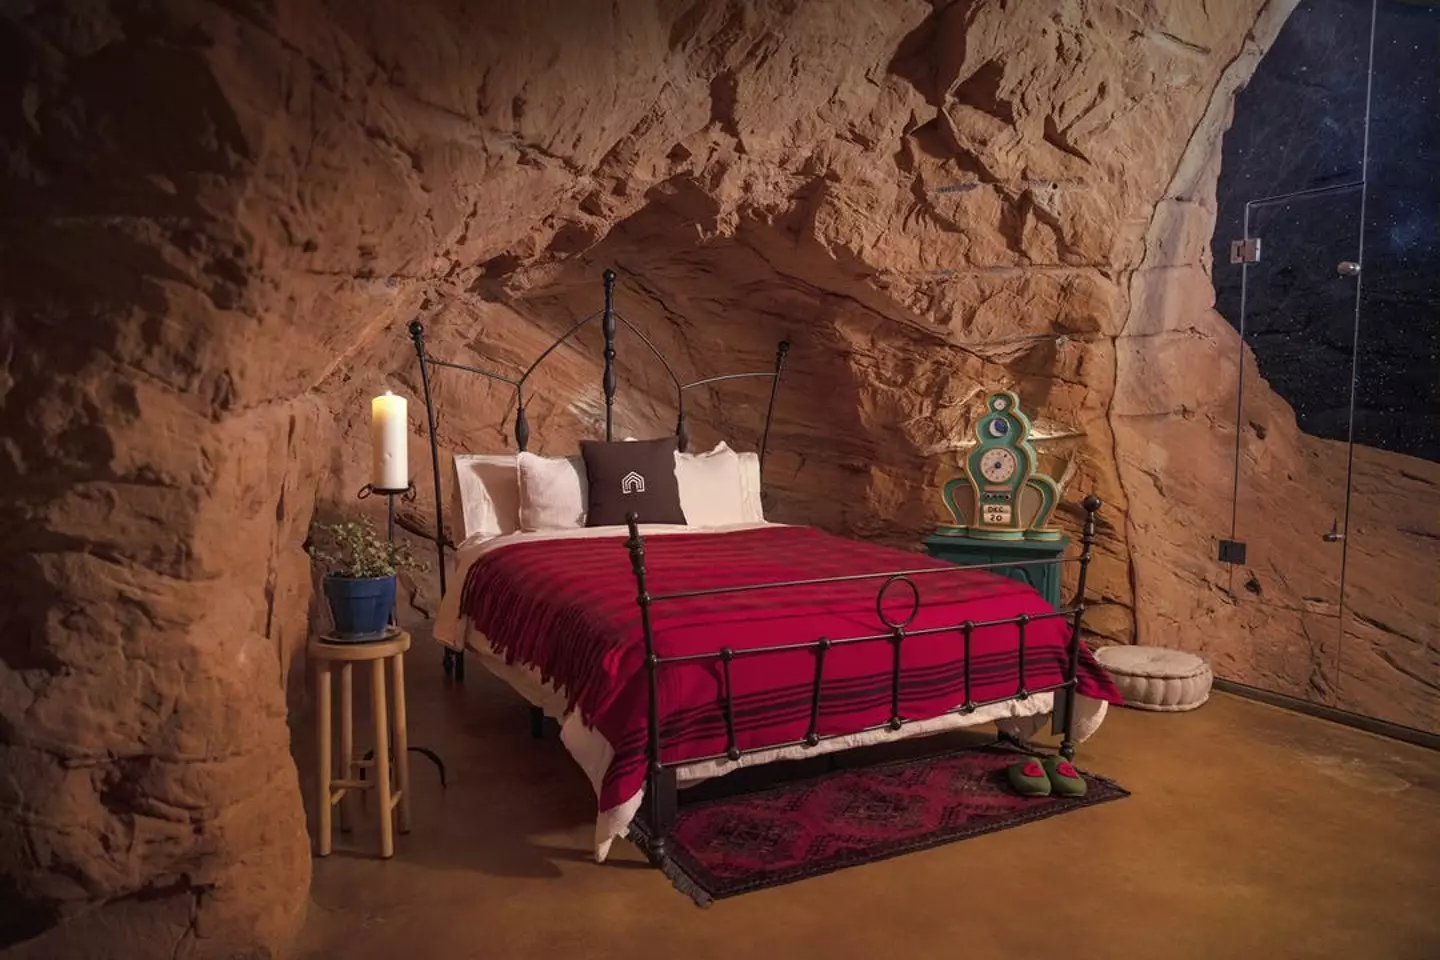 The Grinch's lair has two bedrooms and two bathrooms. (